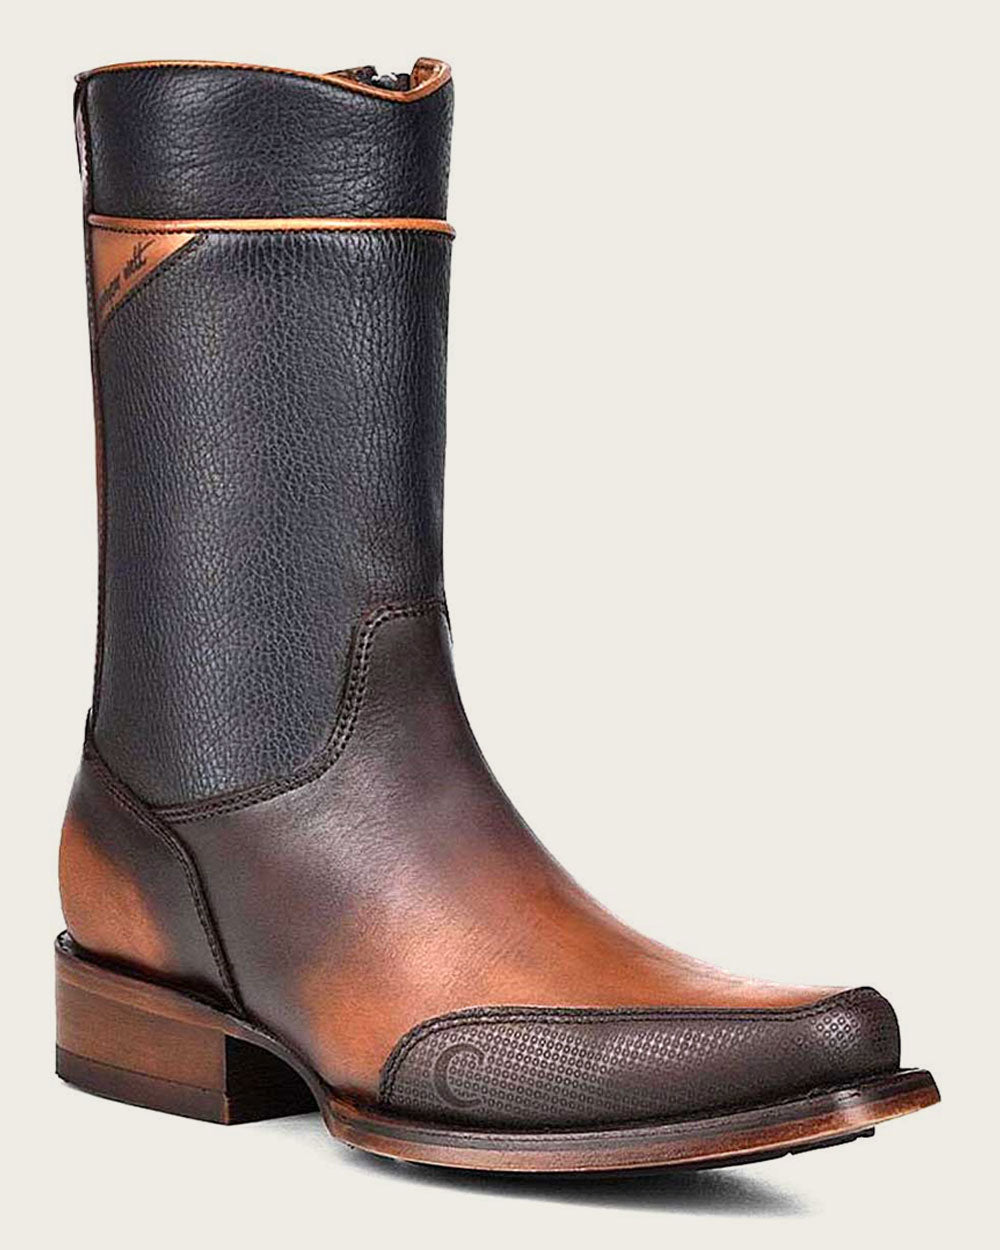 Brown Hand-painted engraved dress boots